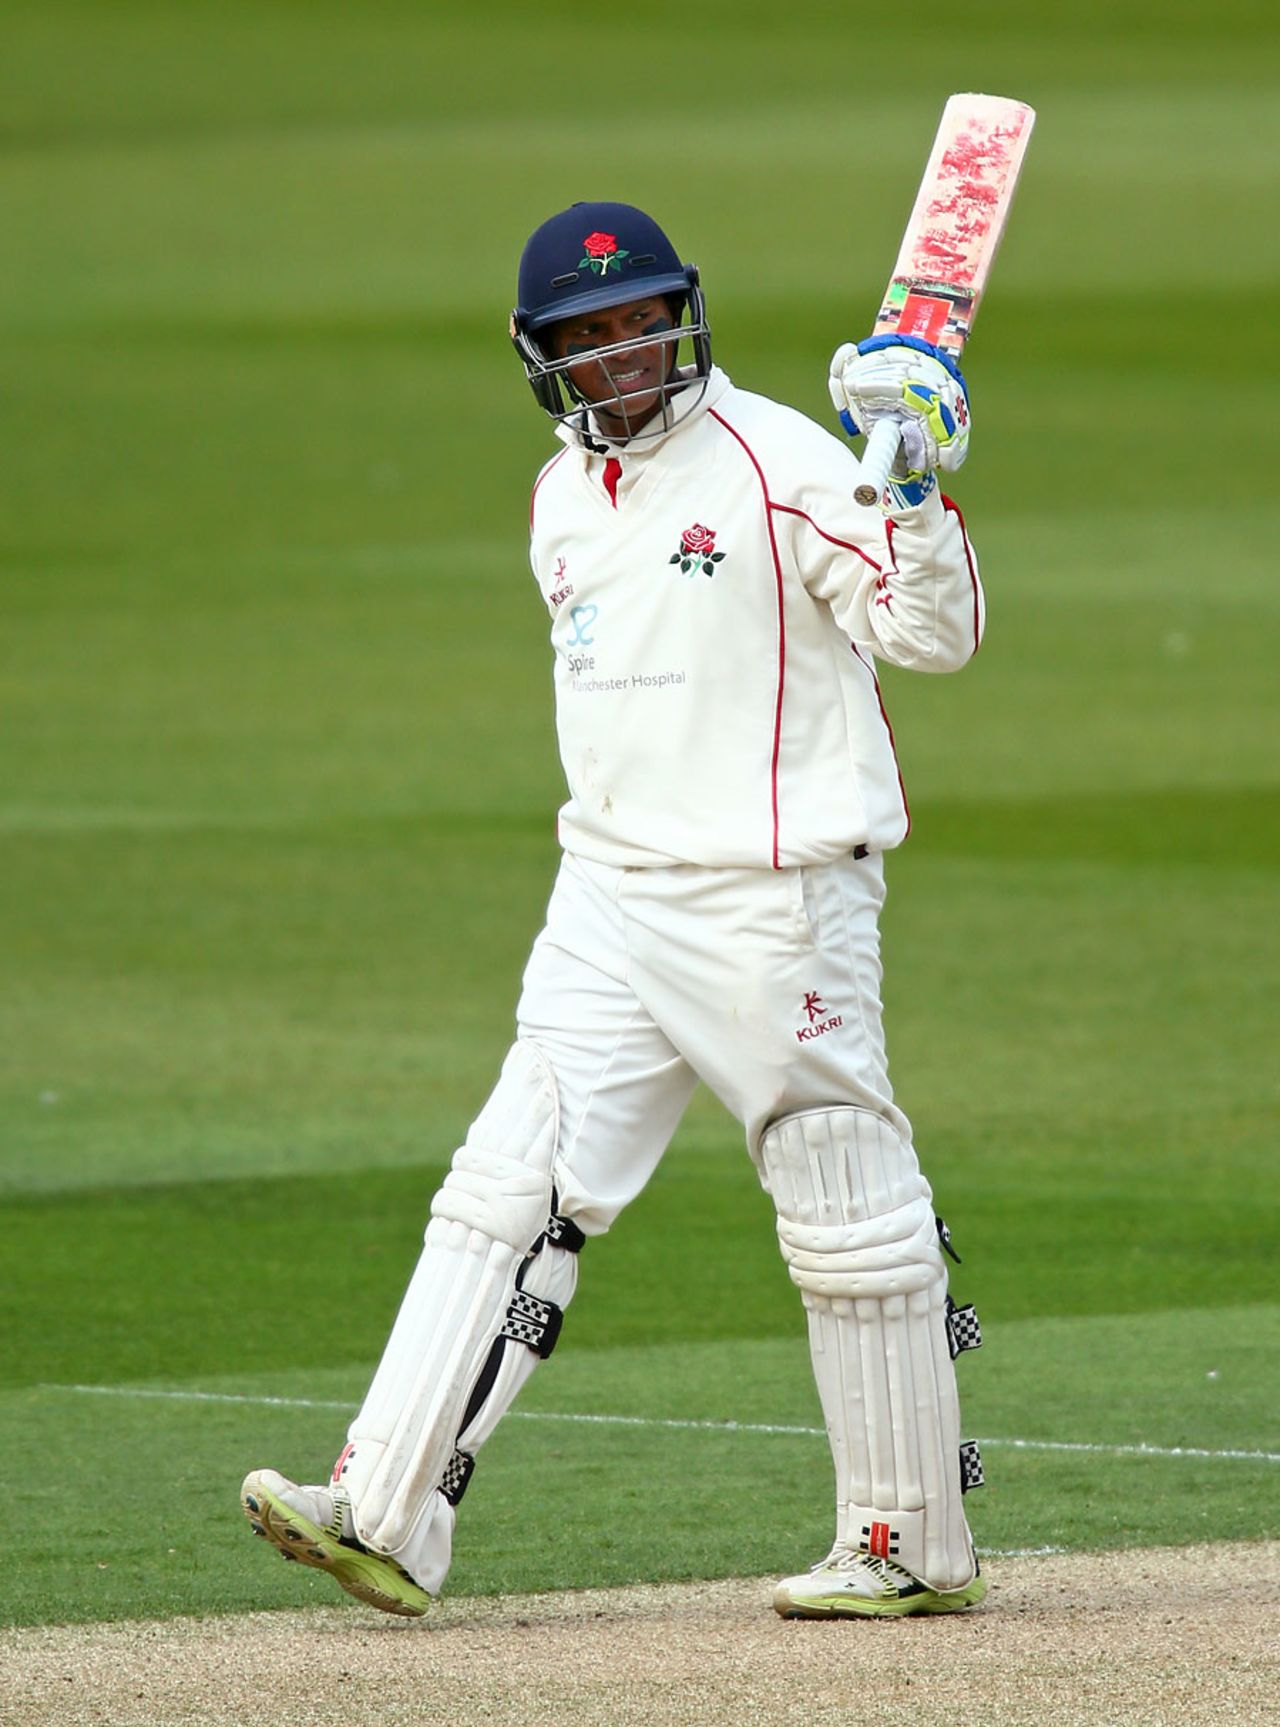 They keep on coming: Shivnarine Chanderpaul notched another century, Surrey v Lancashire, Specsavers Championship, Division One, The Oval, 2nd day, April 15, 2017